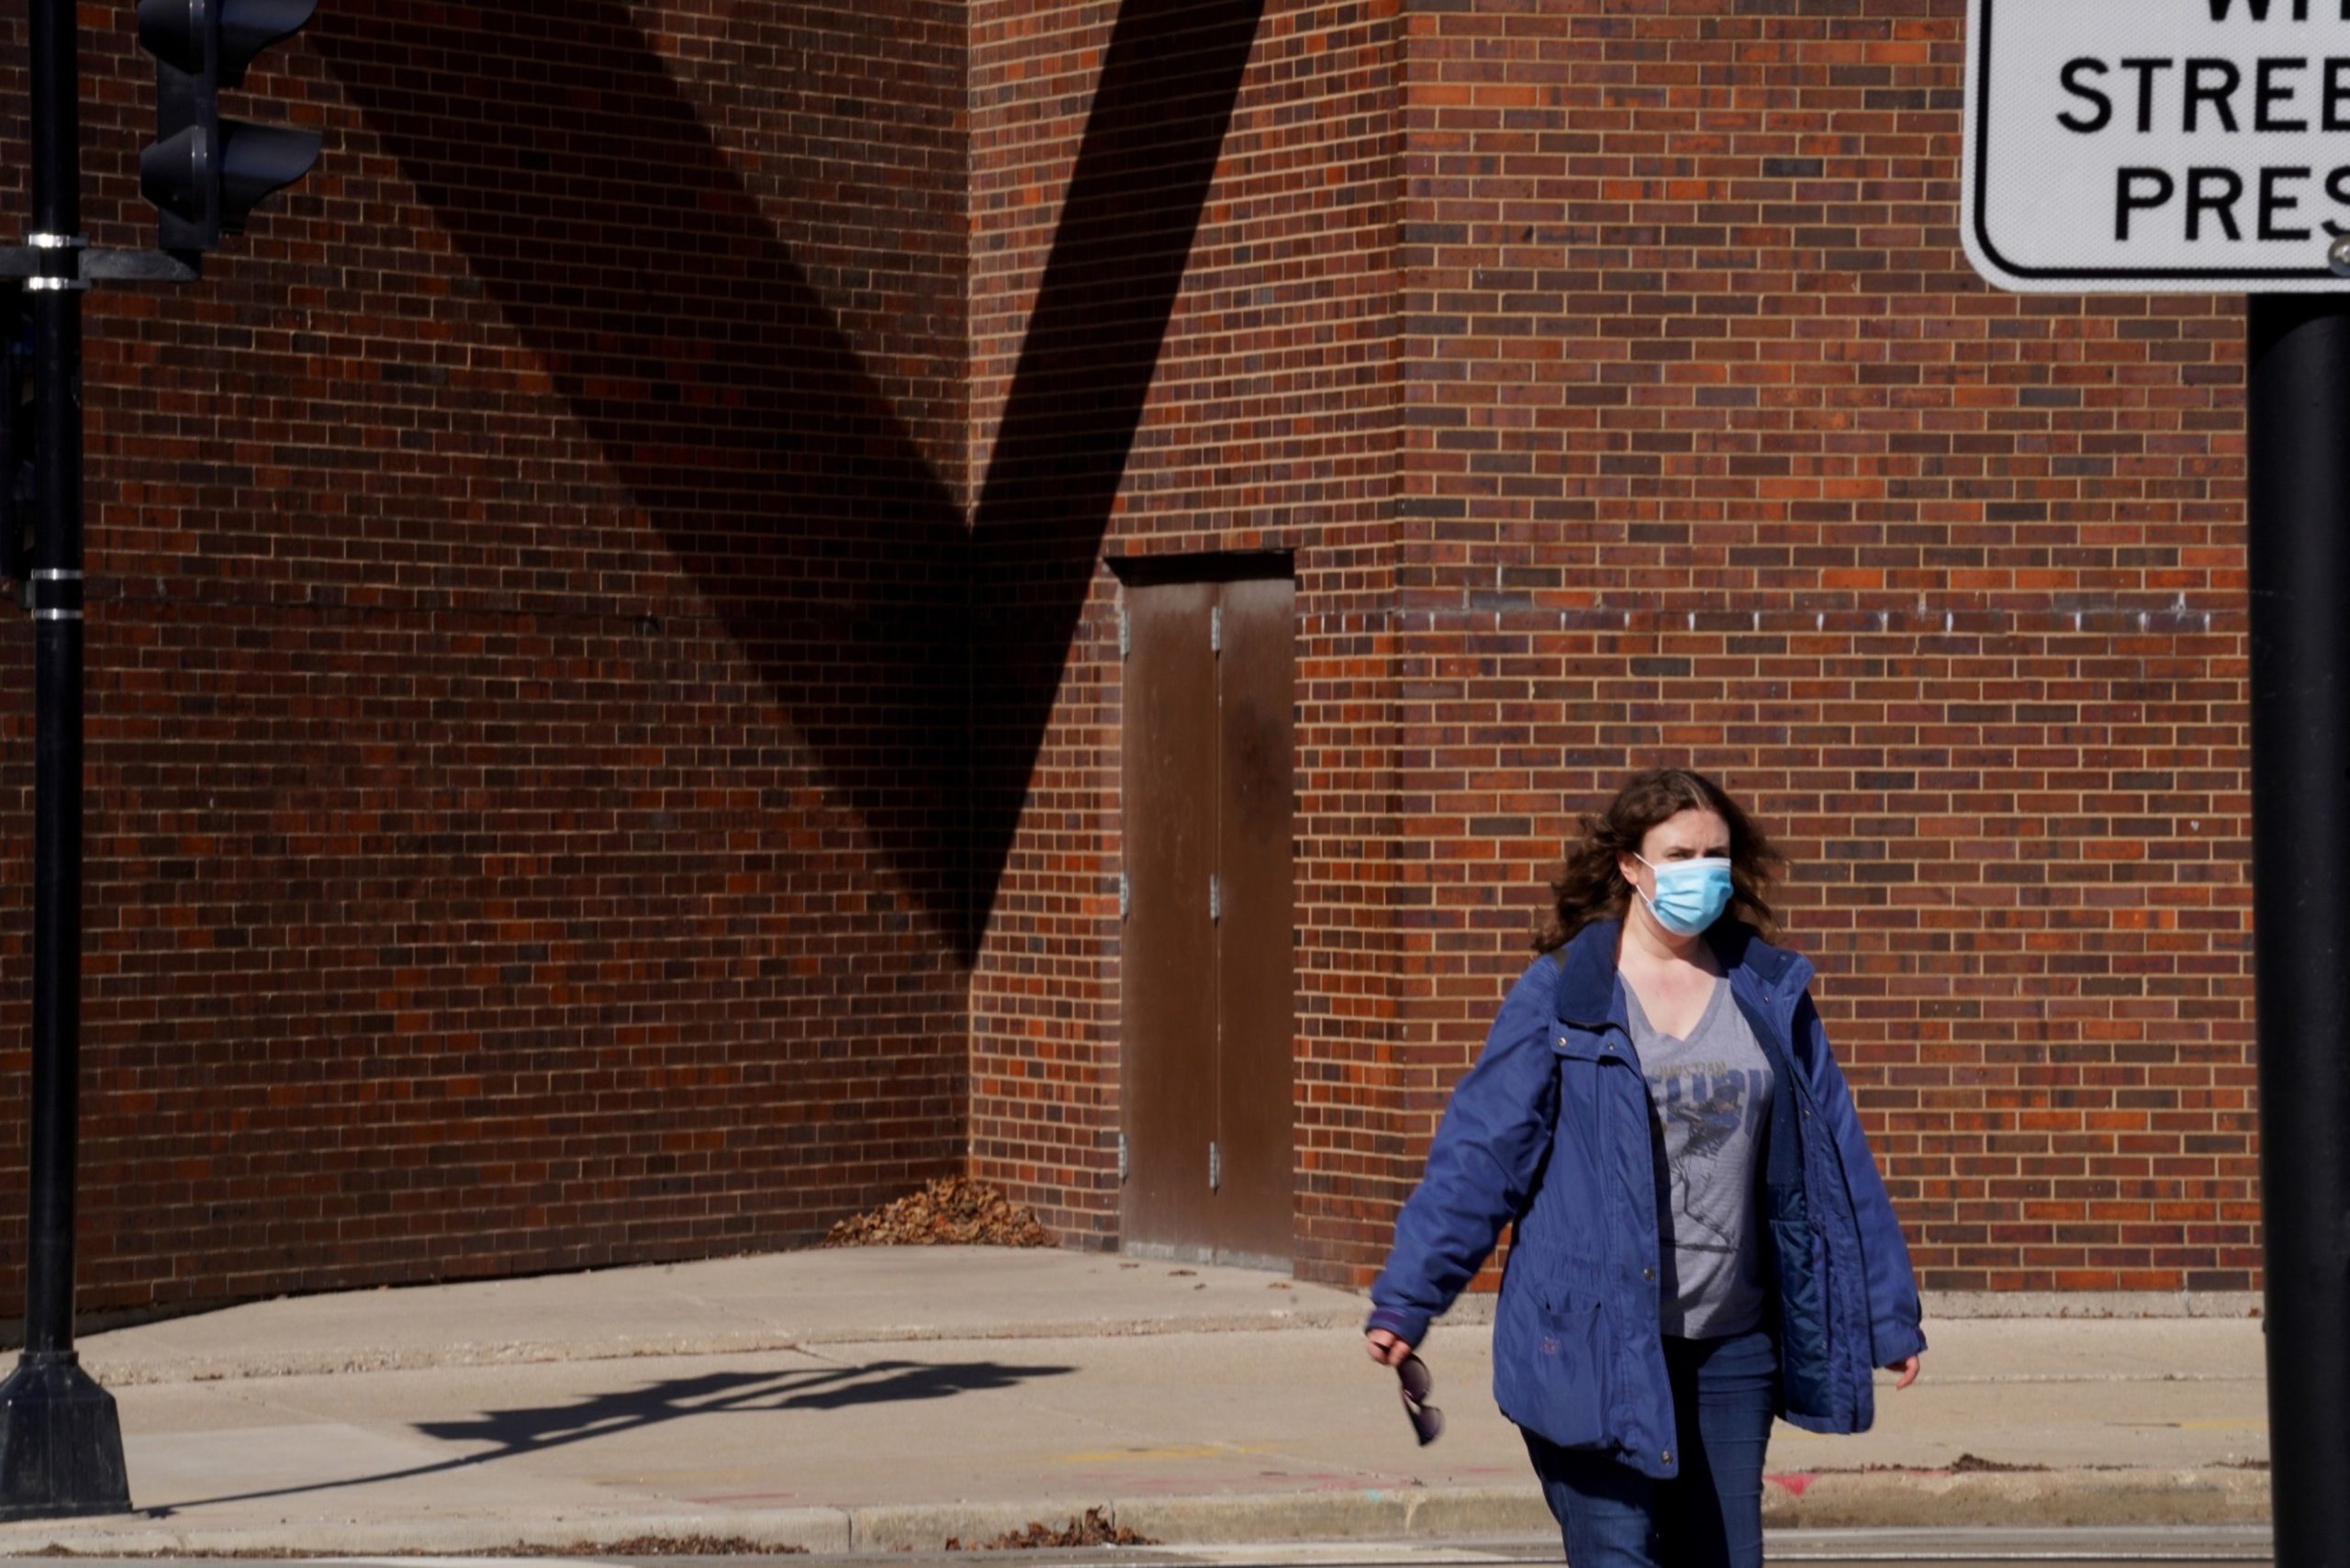 A pedestrian wearing a protective mask walks along a street in Milwaukee, Wisconsin, U.S., on Thursday, April 2, 2020. A federal judge refused to postpone Wisconsin's presidential primary on Tuesday, but extended the deadline for absentee voting by a week. Photographer: Thomas Werner/Bloomberg